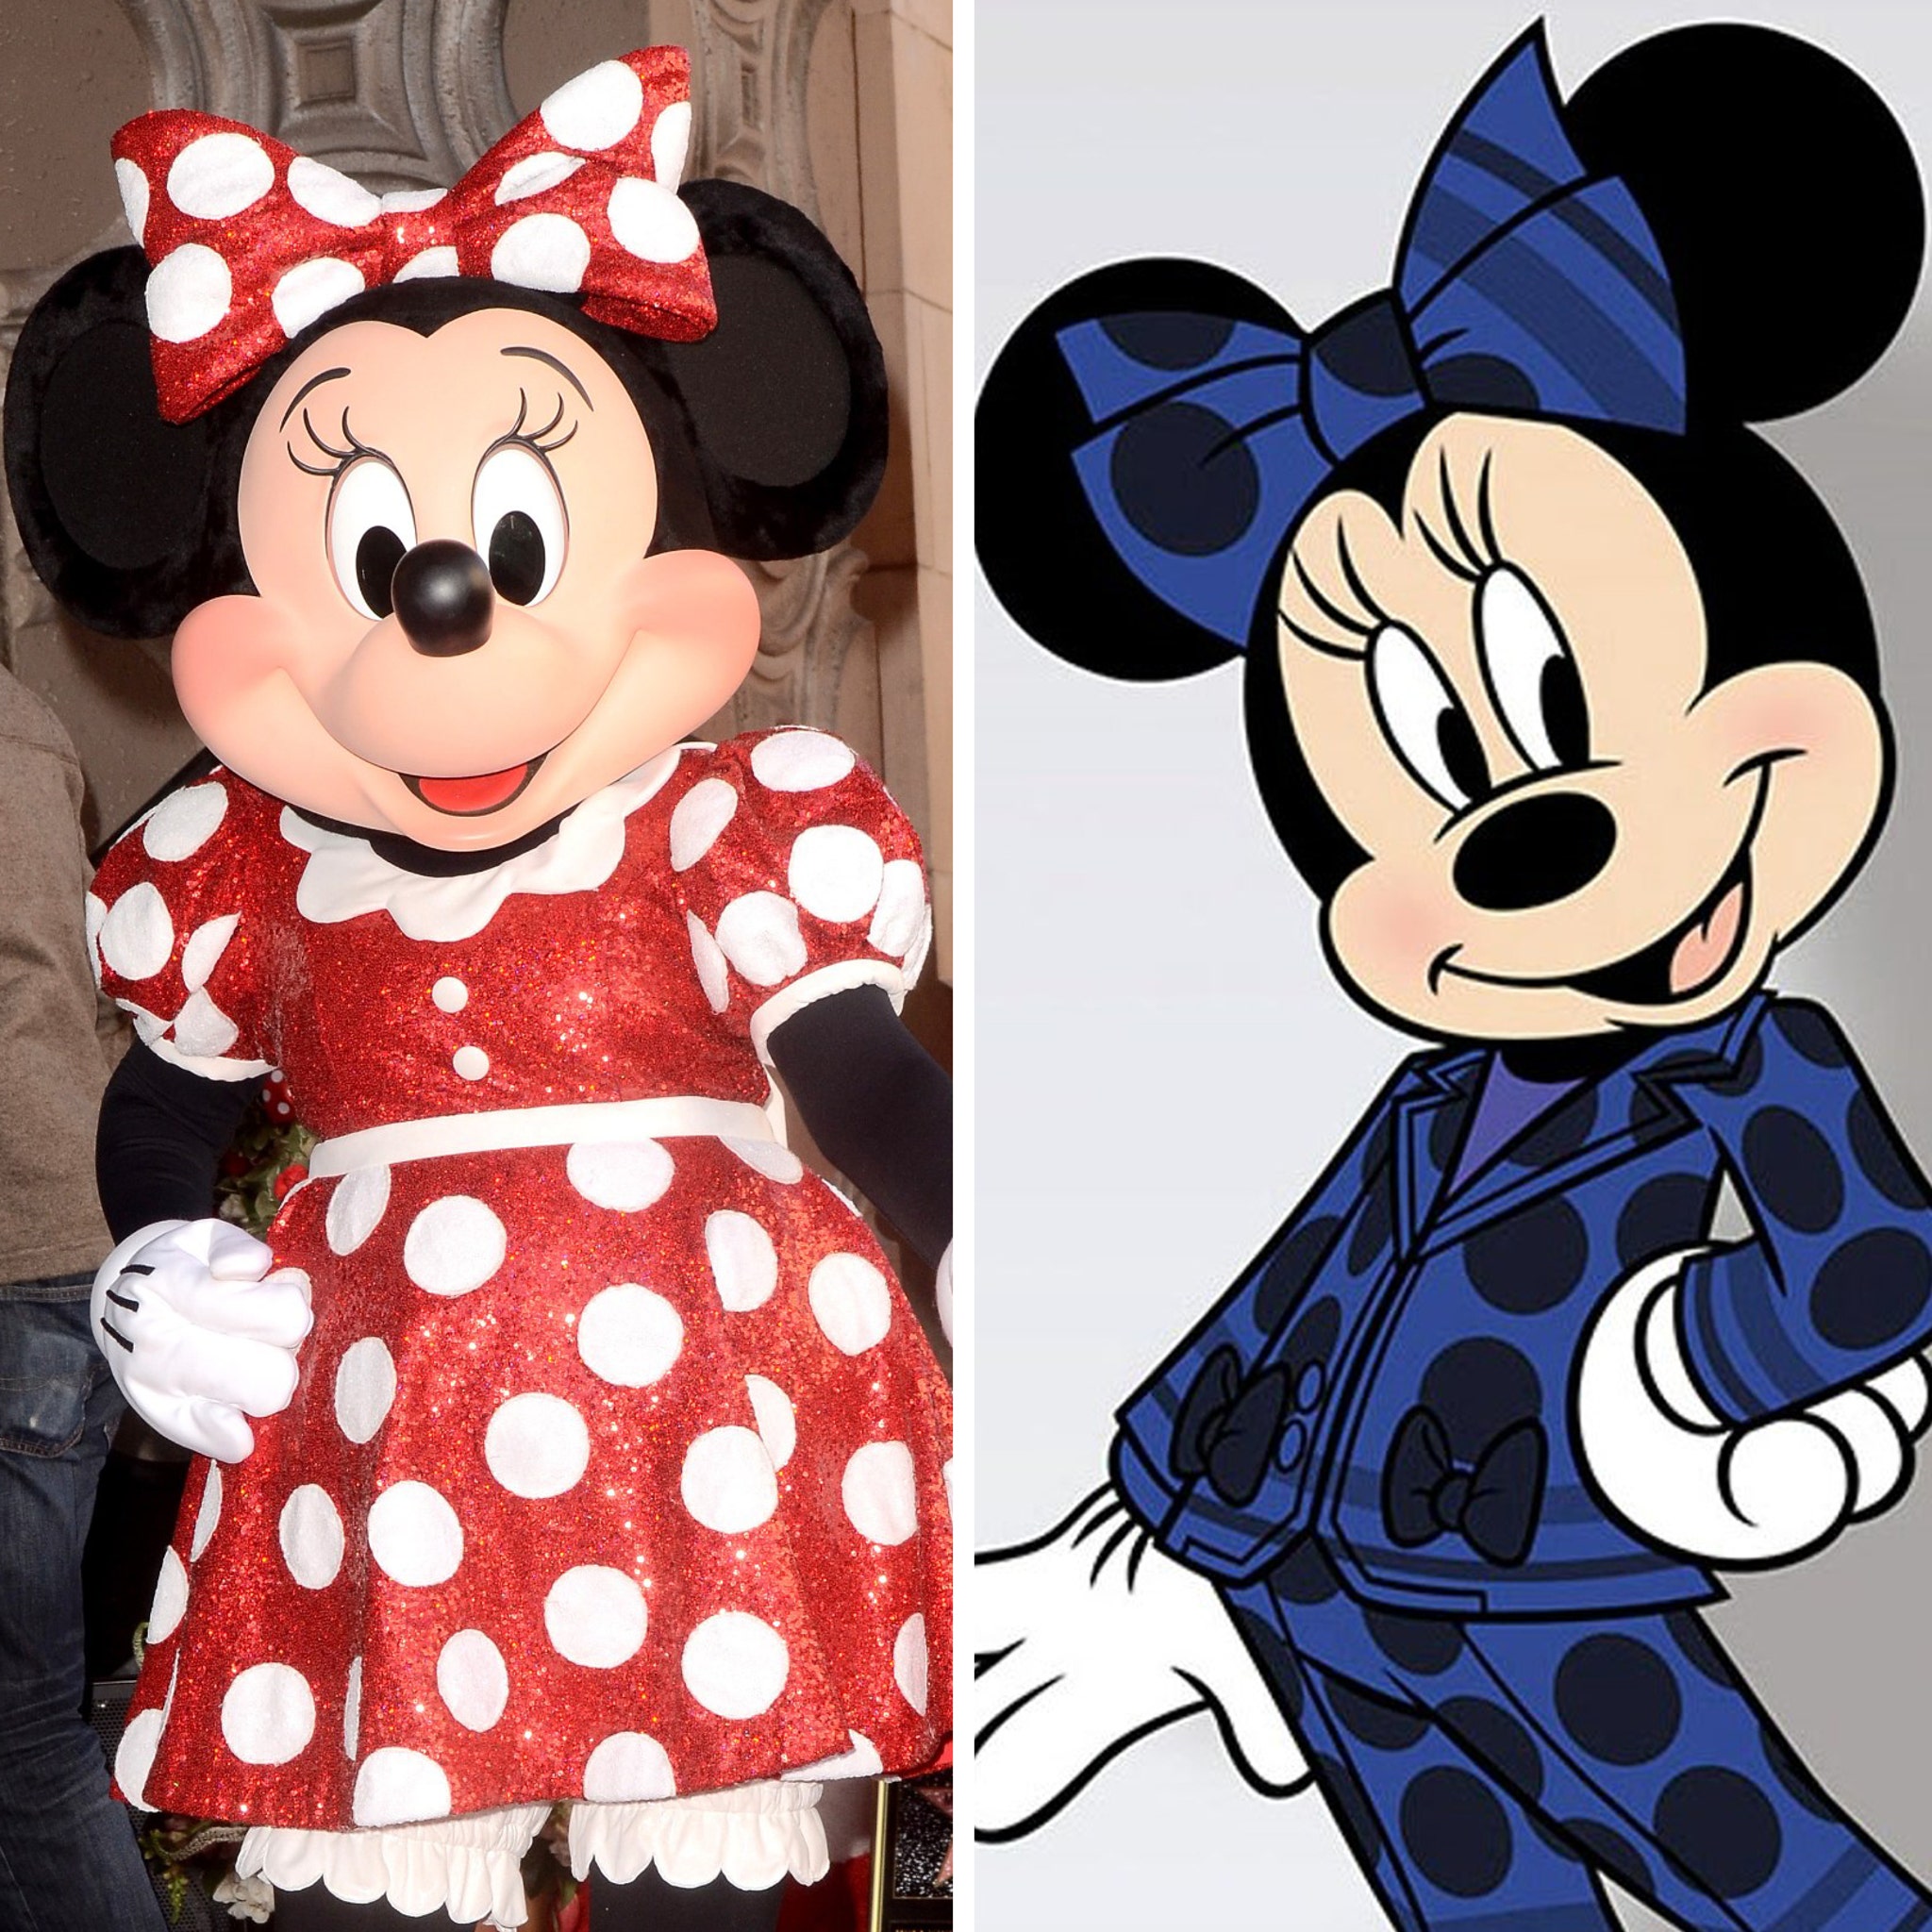 Minnie Mouse to Be Dressed by an Iconic Fashion Designer for Disneyland  Paris's 30th Anniversary